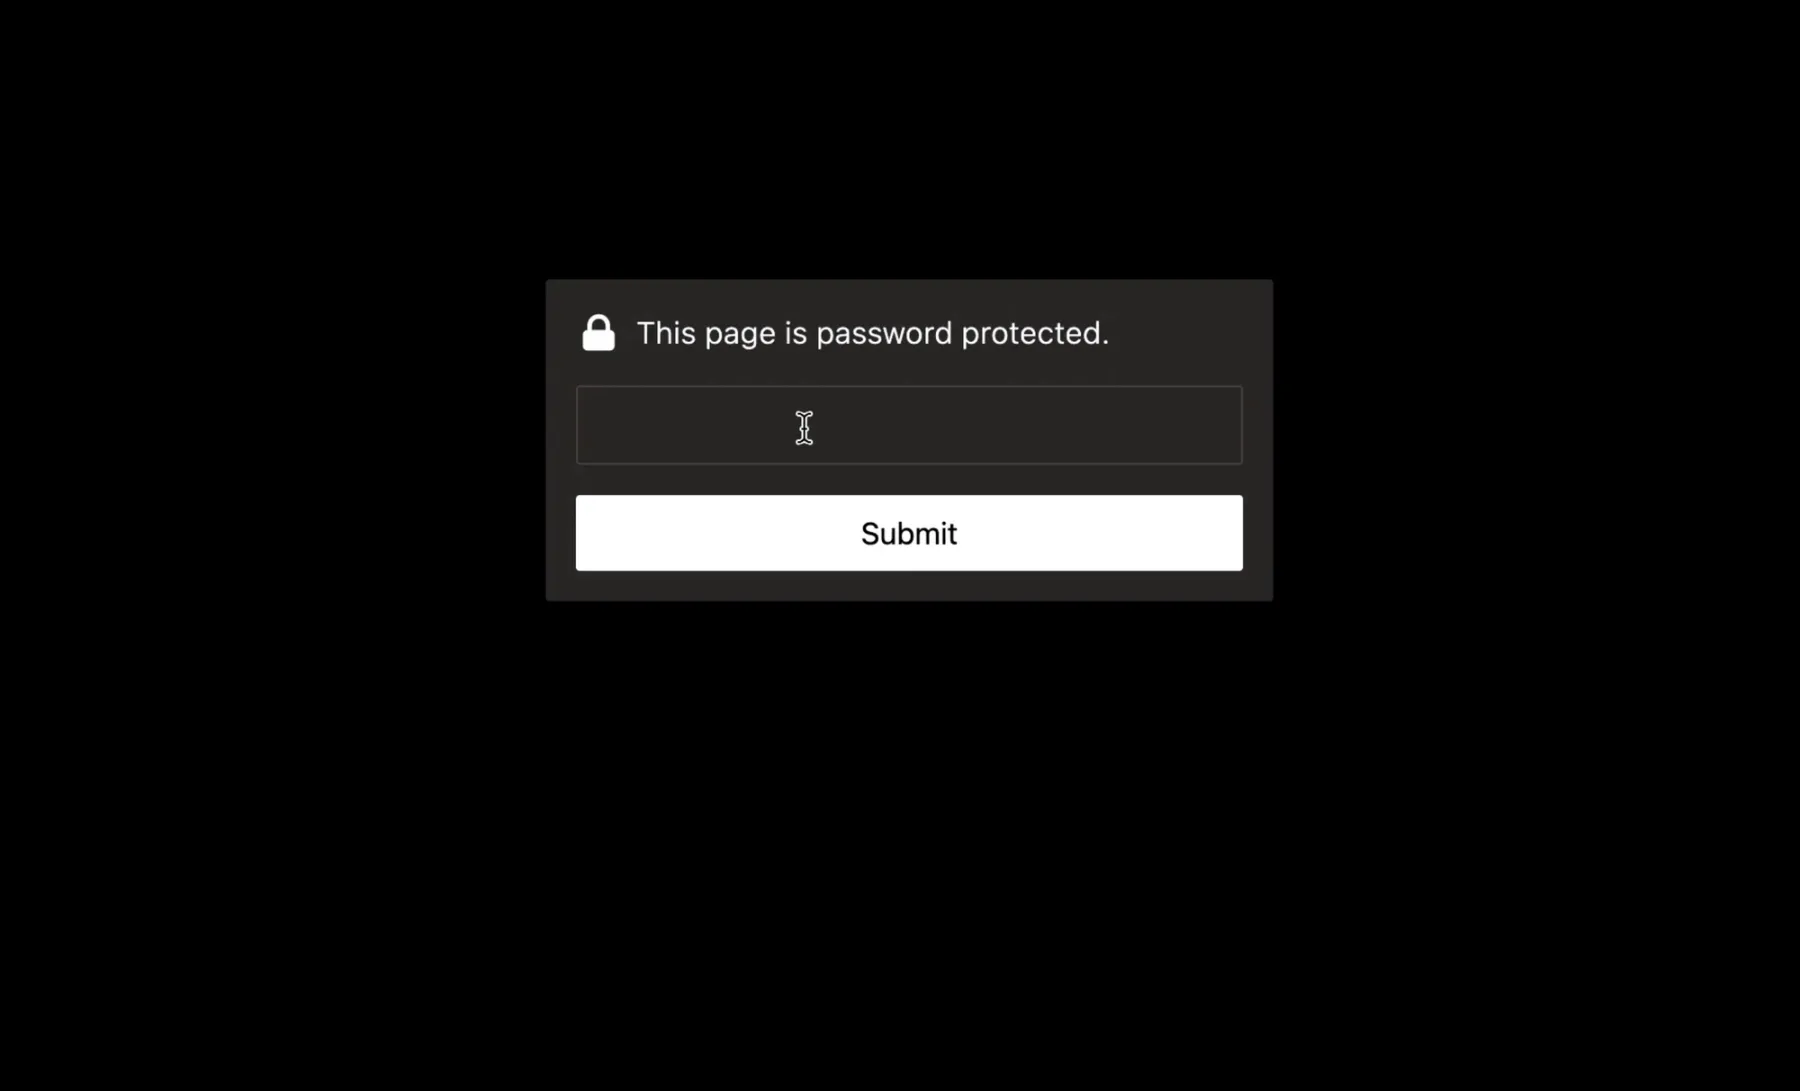 Example static site password protected with PageCrypt